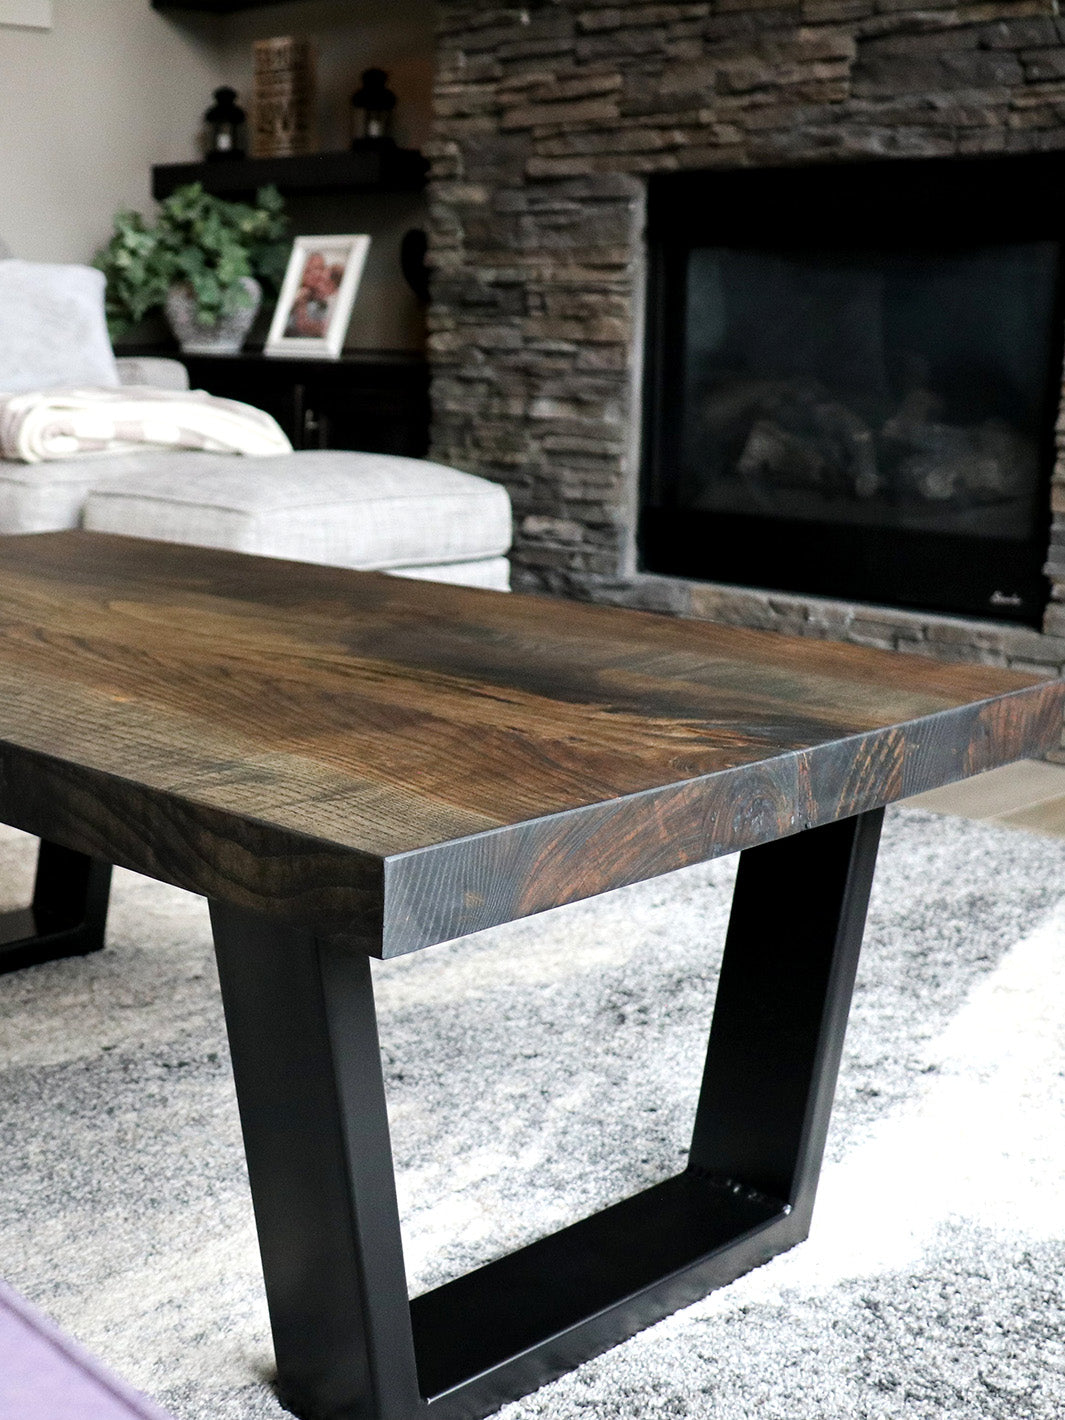 Modern Black Charcoal Ash Wood and Tapered Steel Coffee Table Earthly Comfort Coffee Tables 1578-6